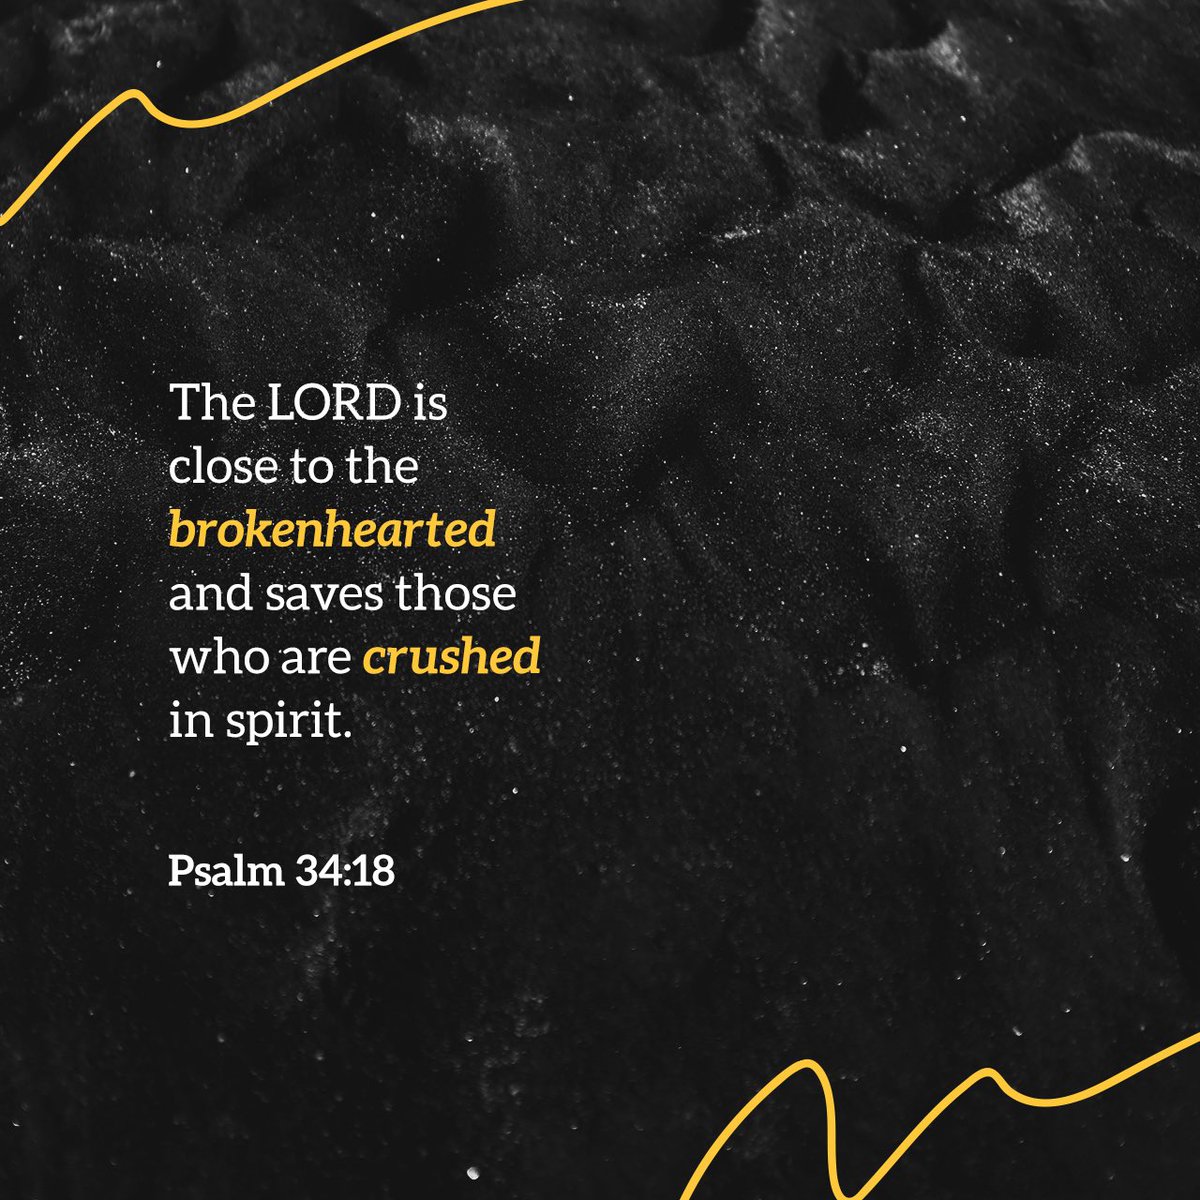 “The Lord is close to the brokenhearted and saves those who are crushed in spirit.” Psalms 34:18